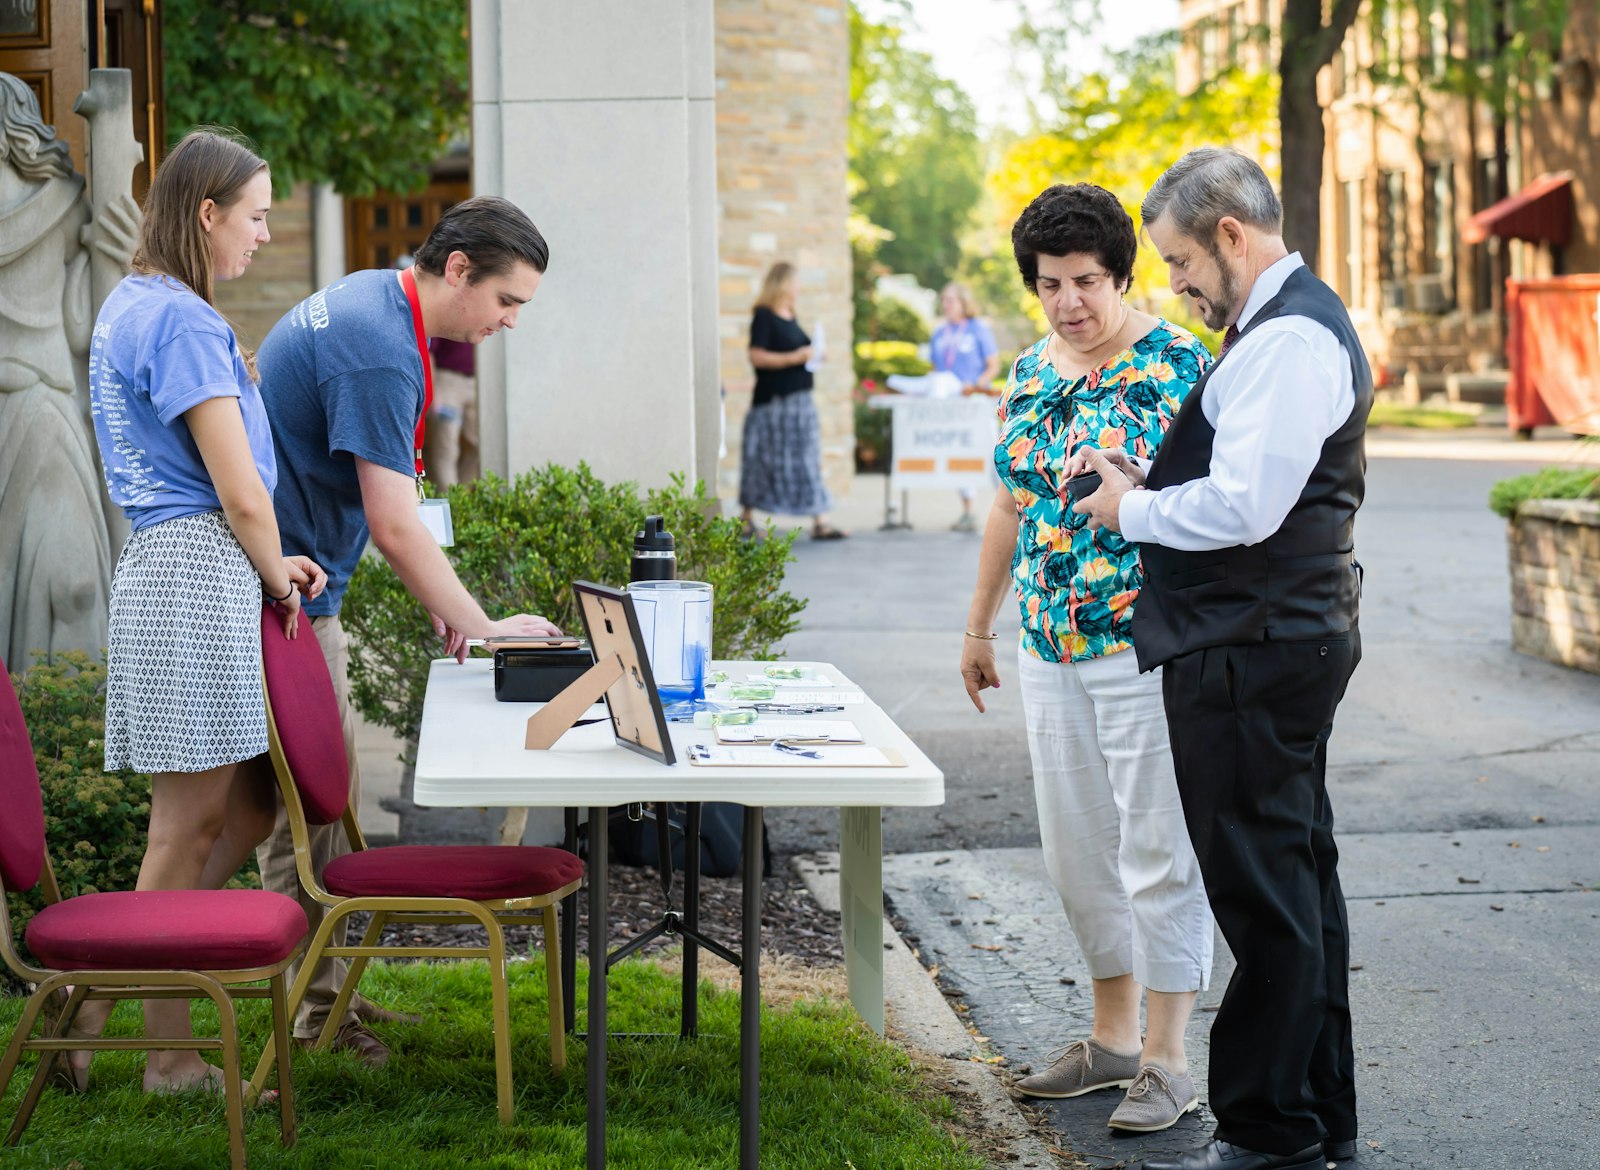 John Vismara and his wife, Michelle, left, speak to parishioners after Mass on Aug. 28 about Project Hope of Michigan, a nonprofit that each year seeks to raise spiritual, financial and moral support for a community member battling cancer. (Valaurian Waller | Detroit Catholic)